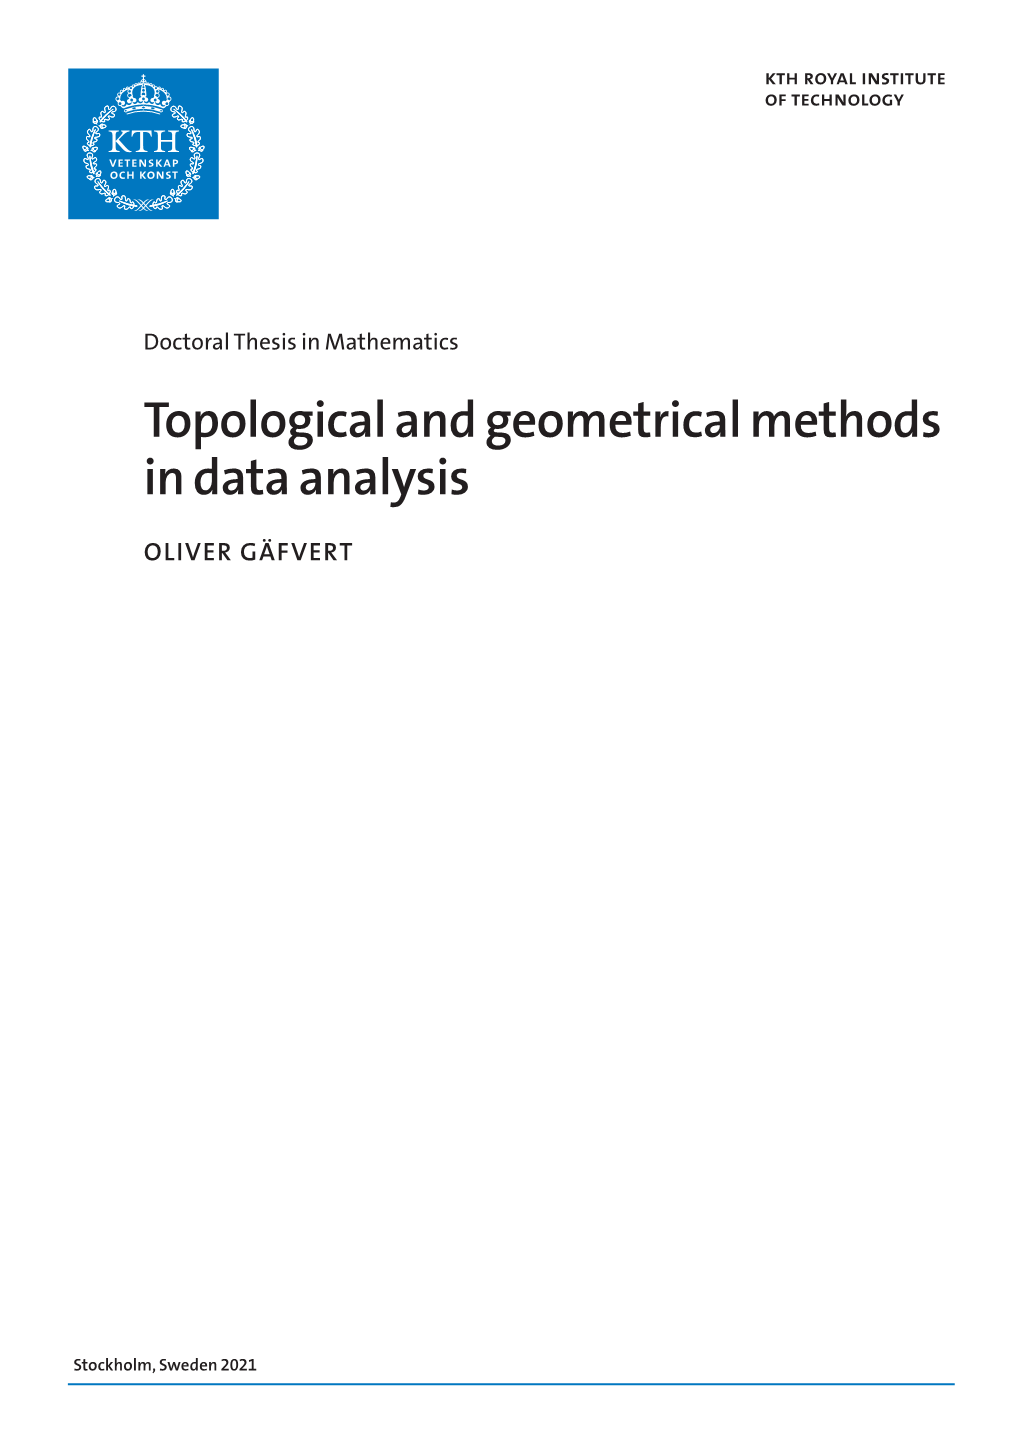 Topological and Geometrical Methods in Data Analysis